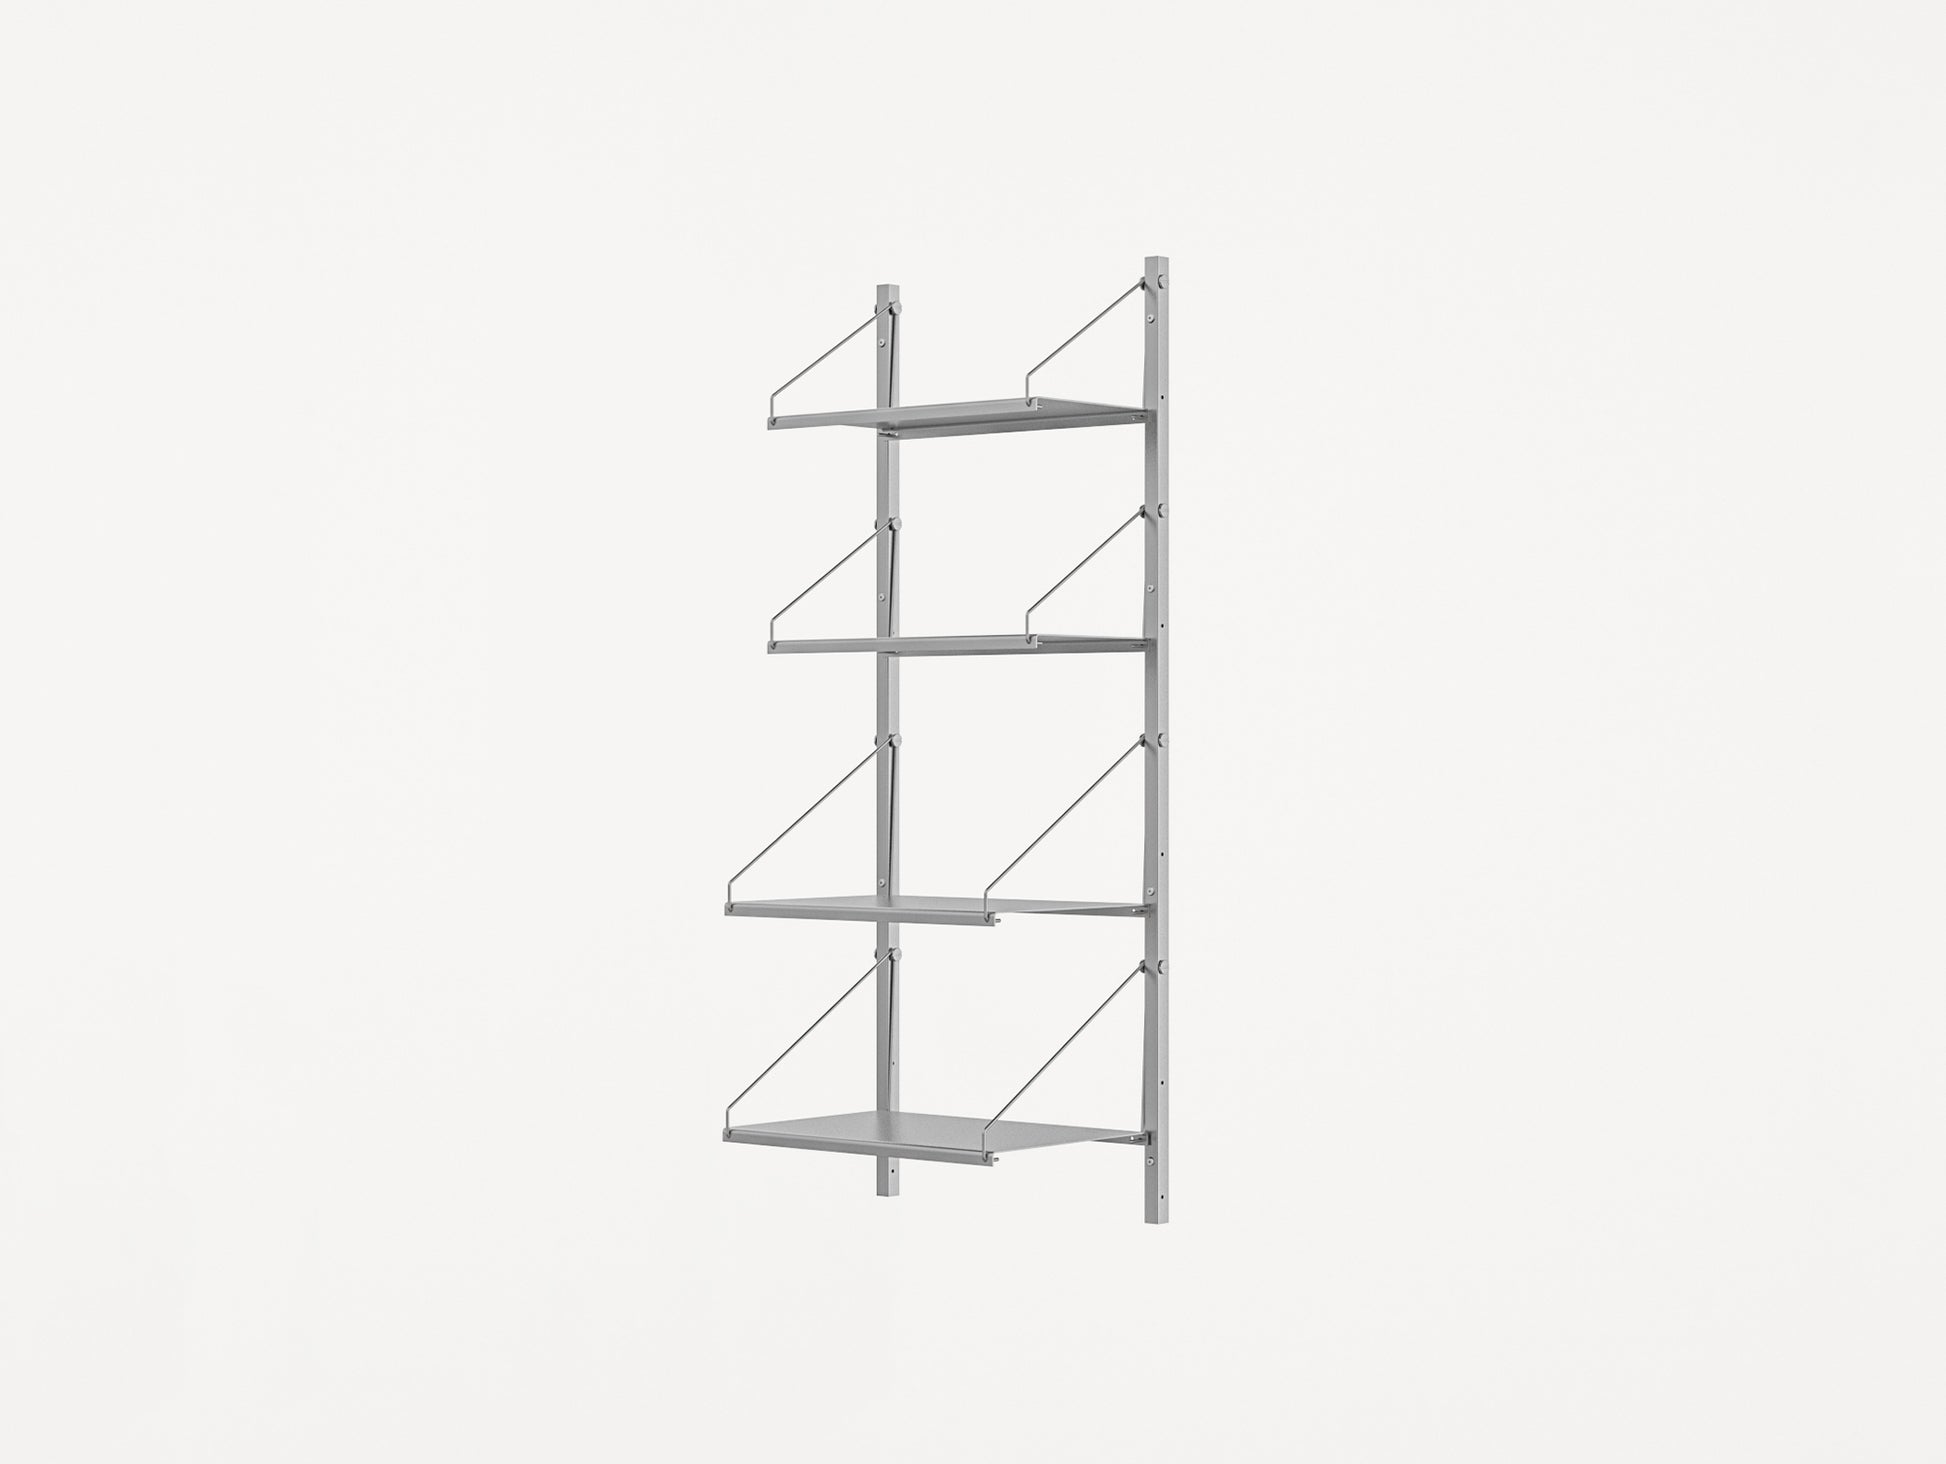 Shelf Library Stainless Steel by Frama - H1084 cm / W40 section